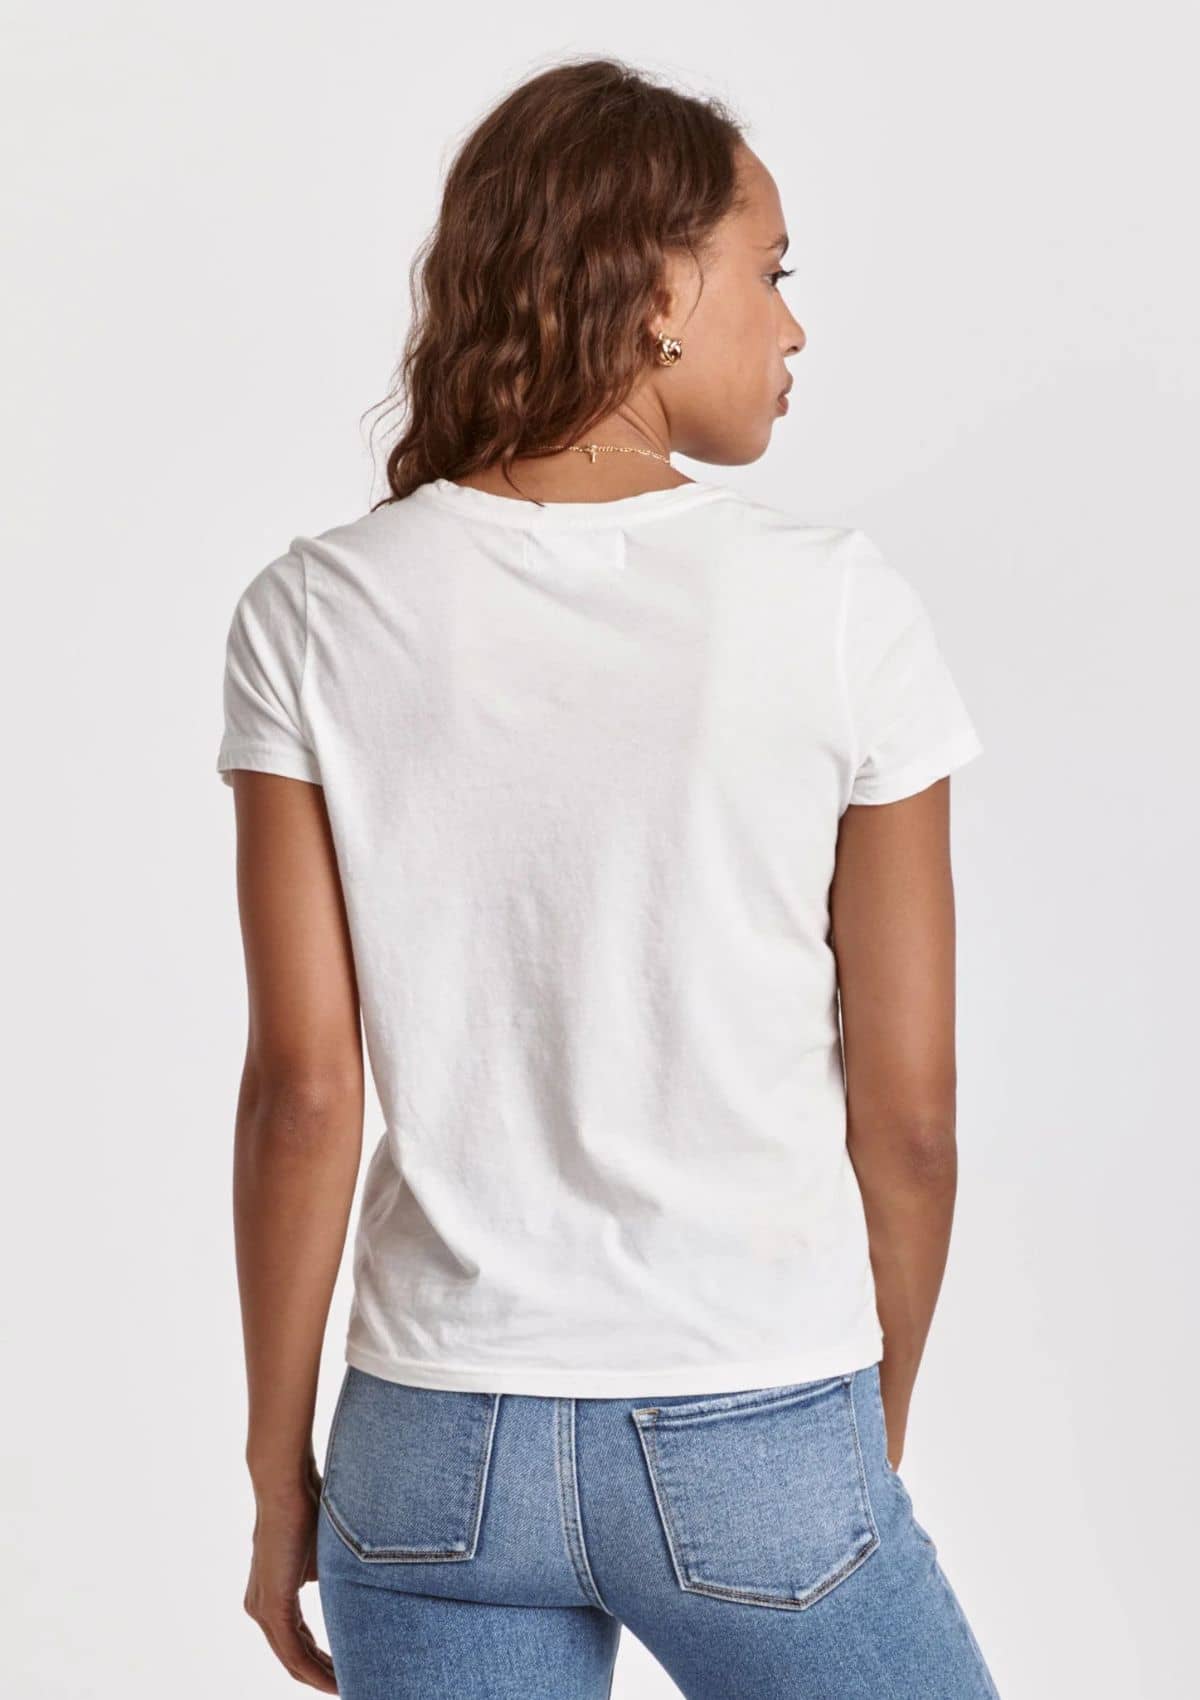 Plain white tee shirt. Paired with jeans.